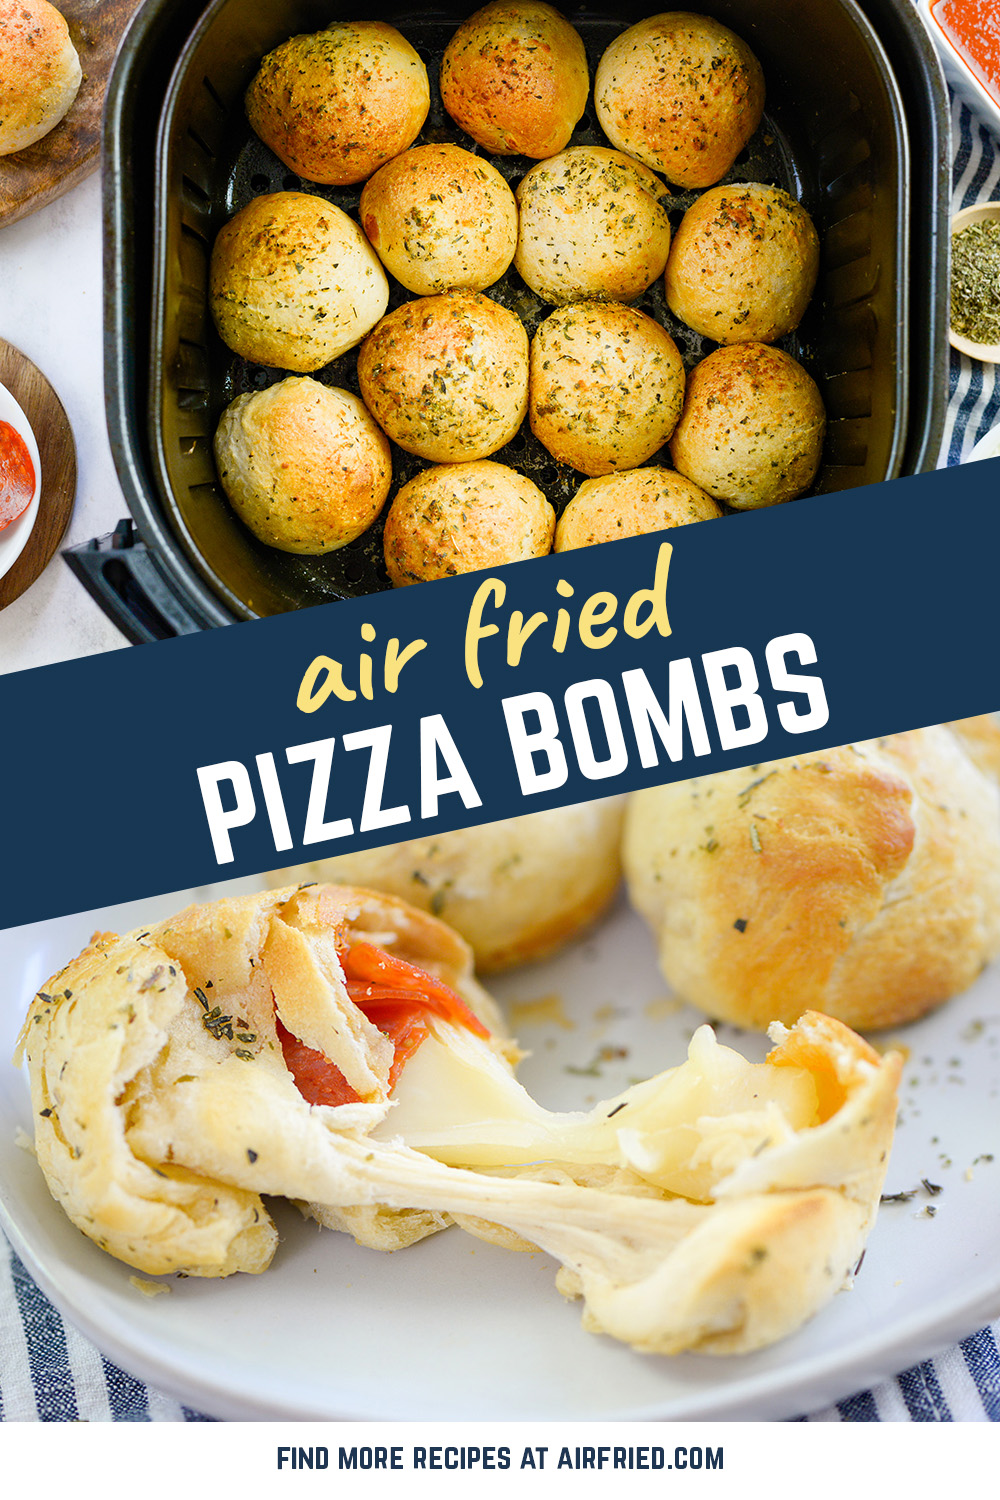 These air fryer pizza bombs make for a great party appetizer!